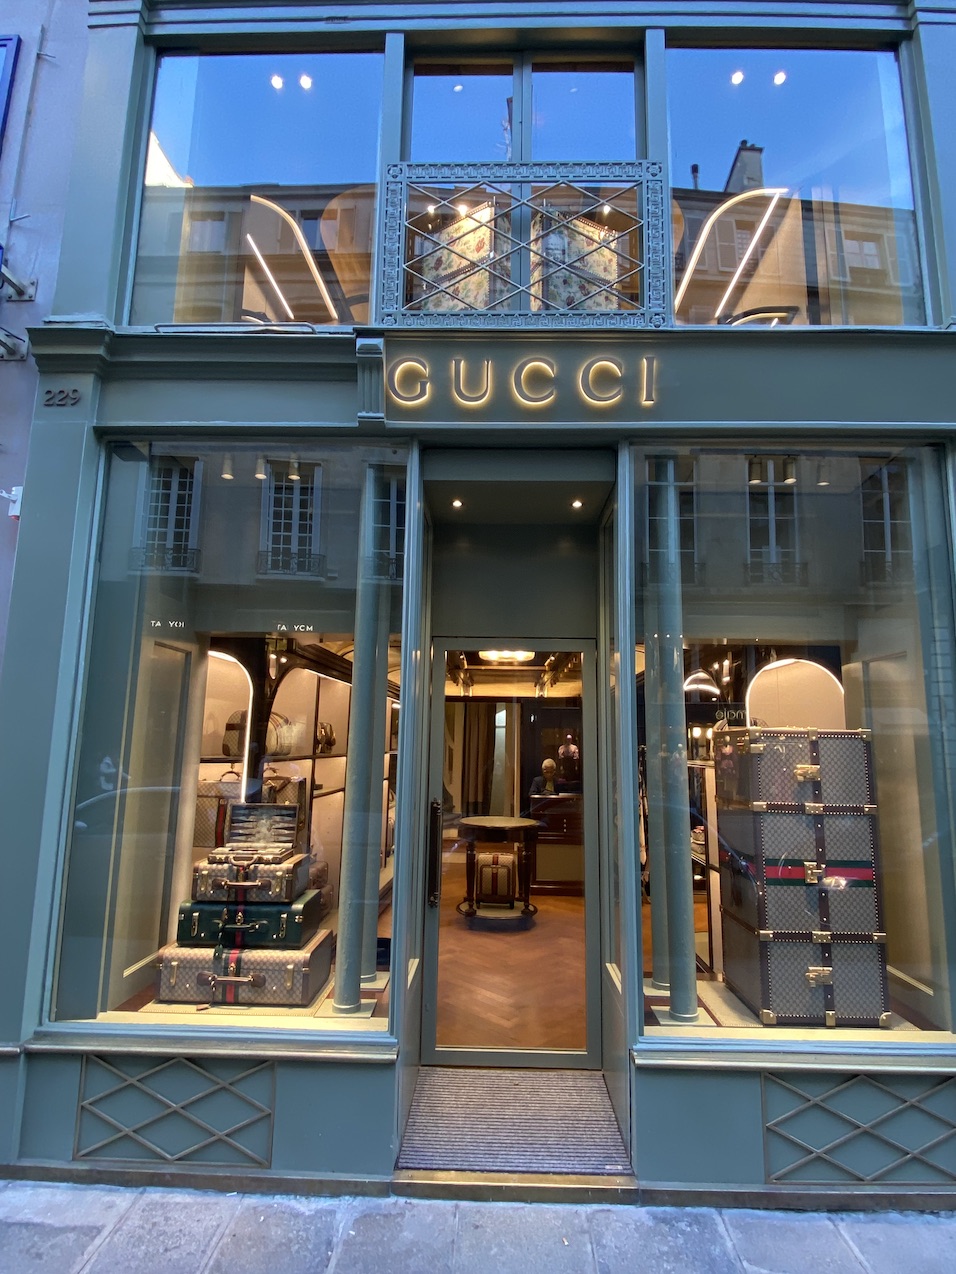 Gucci Officially Opens First Stand-Alone Luggage Store in Paris